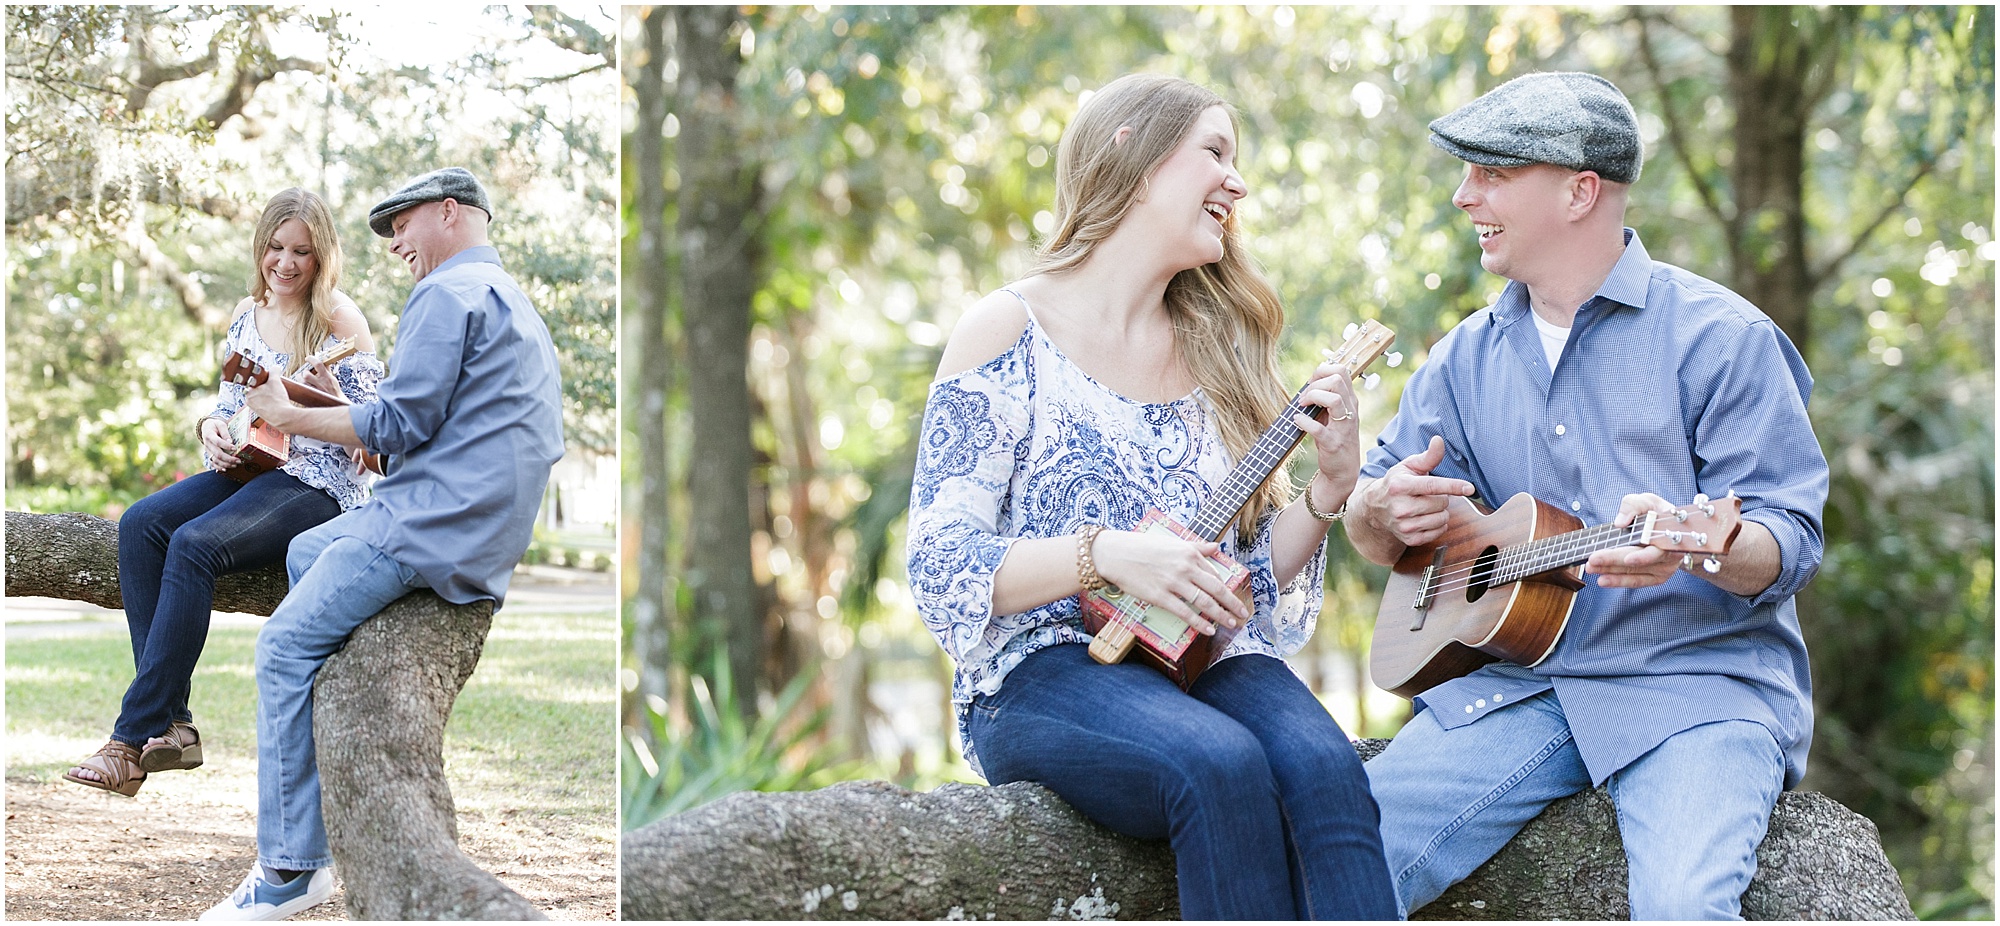 Musical outdoor couple playing a guitar and ukulele in a tree